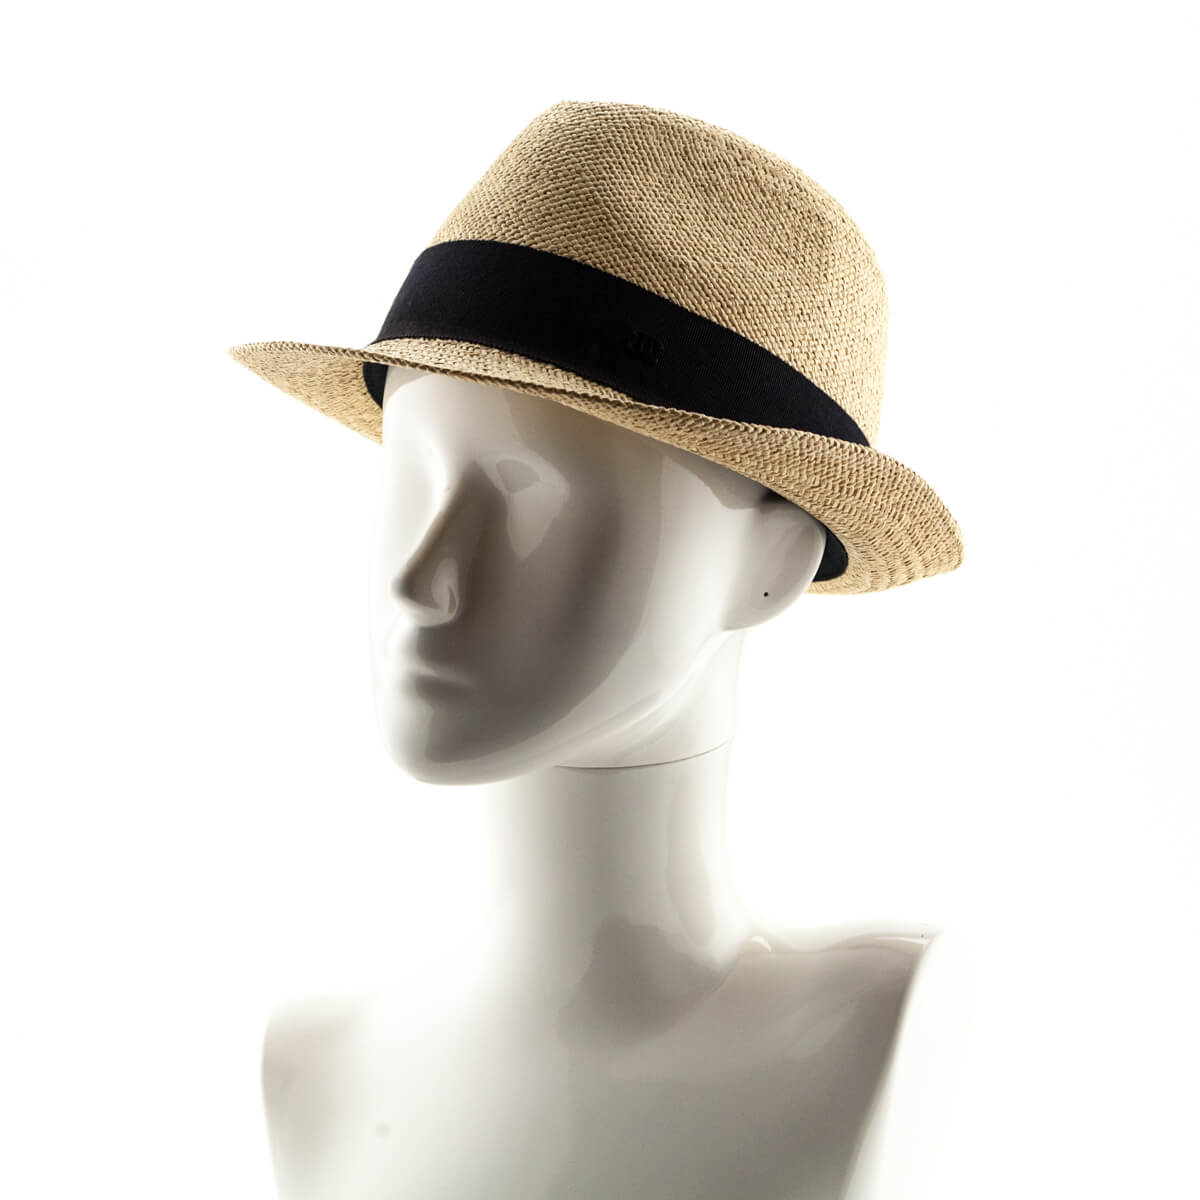 Chanel Beige Straw Fedora Hat Size M - Love that Bag etc - Preowned Authentic Designer Handbags & Preloved Fashions